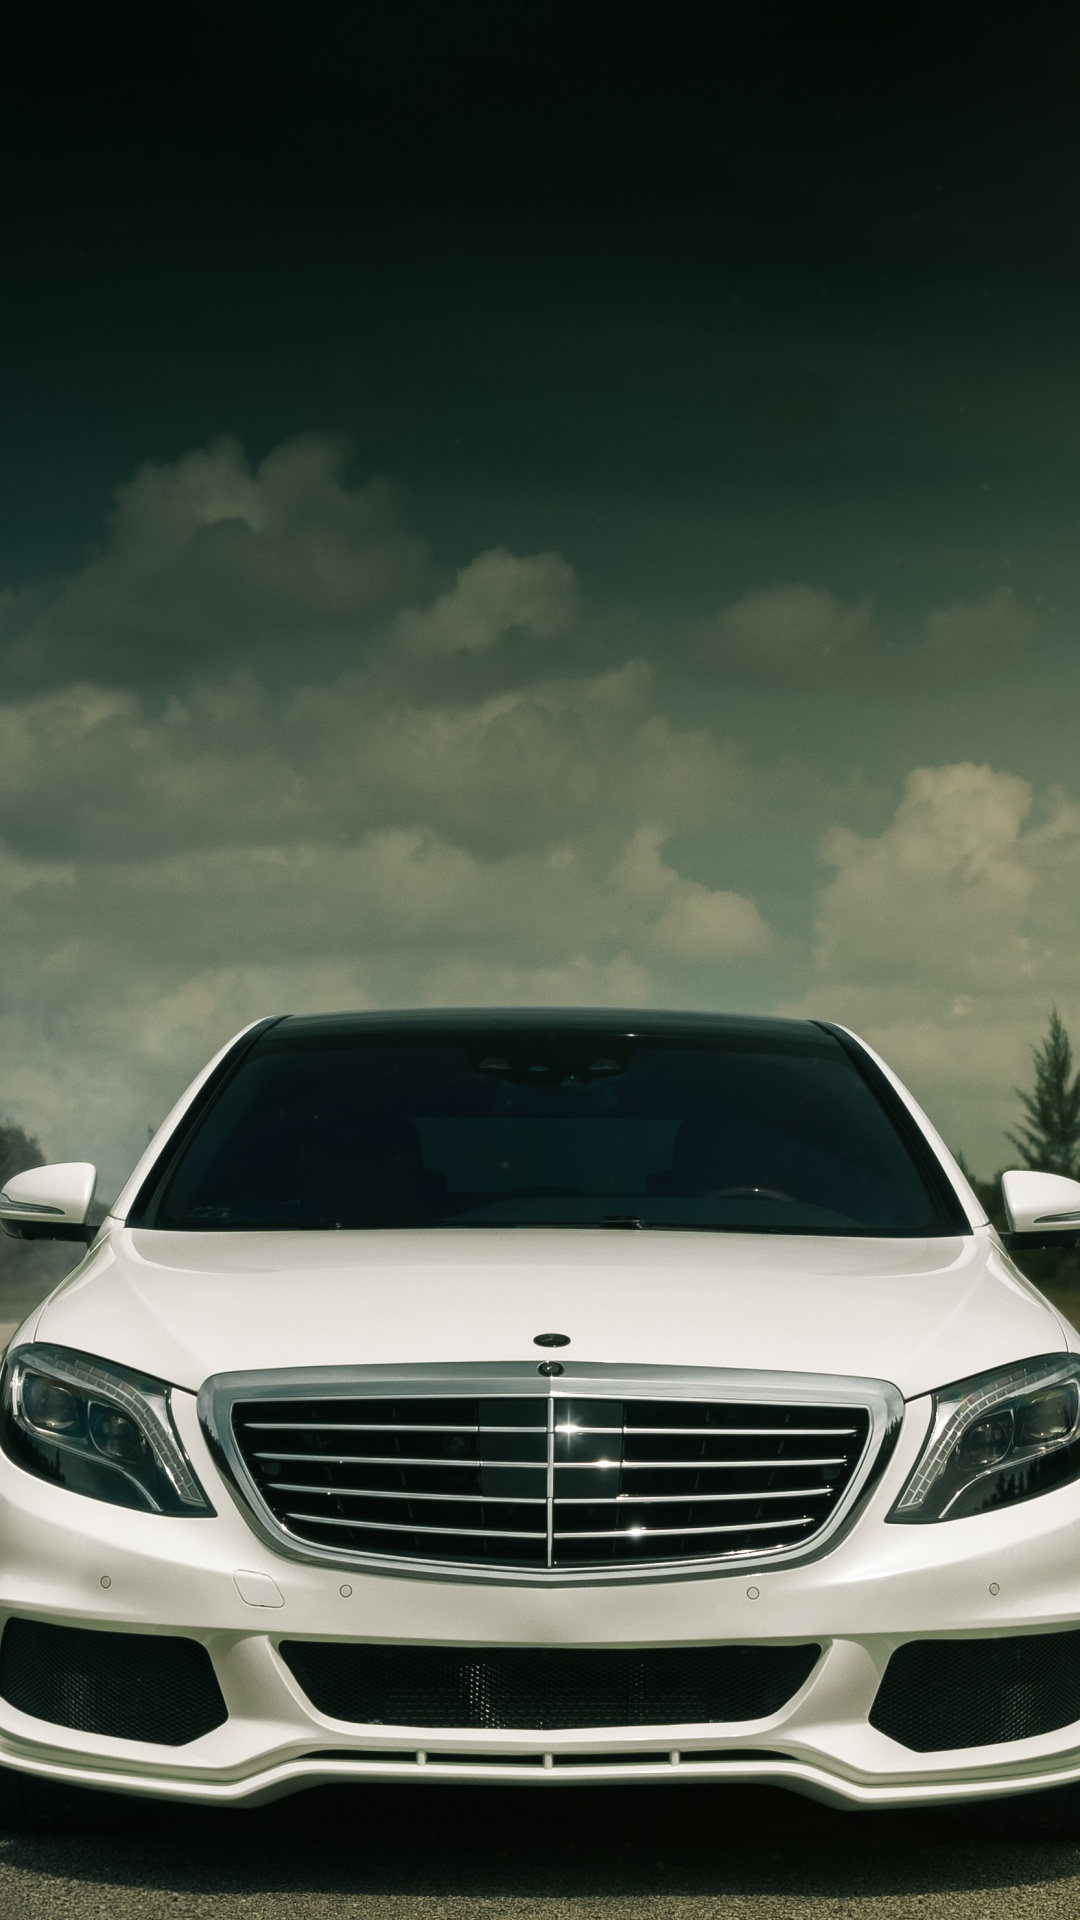 White Mercedes Benz Car on Road During Night Time. Wallpaper in 1080x1920 Resolution